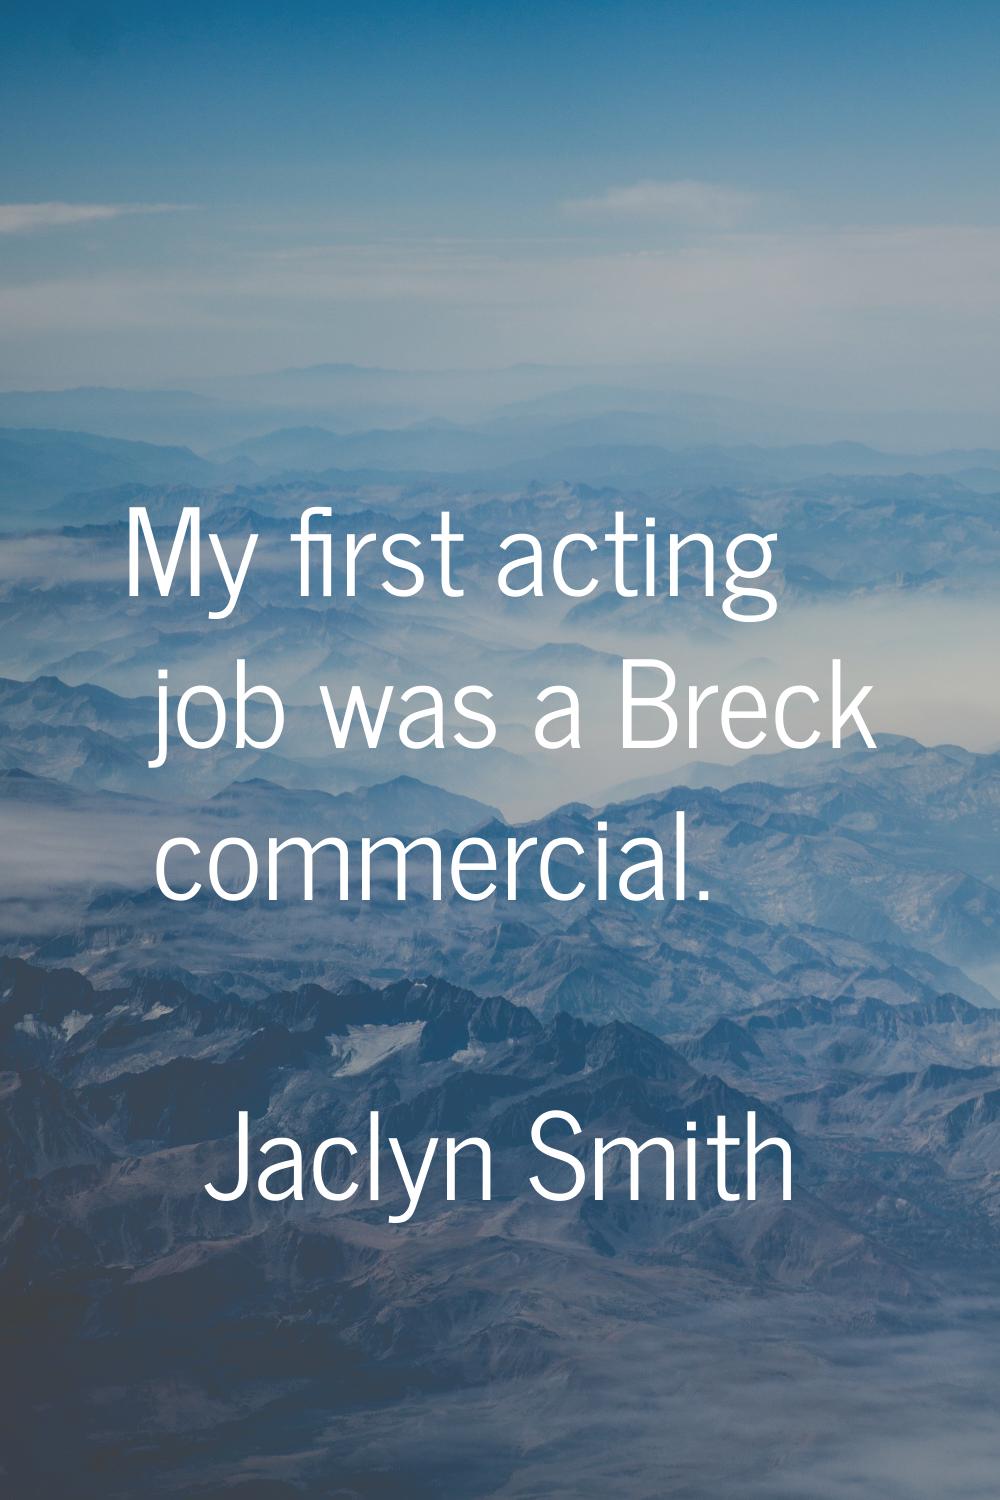 My first acting job was a Breck commercial.